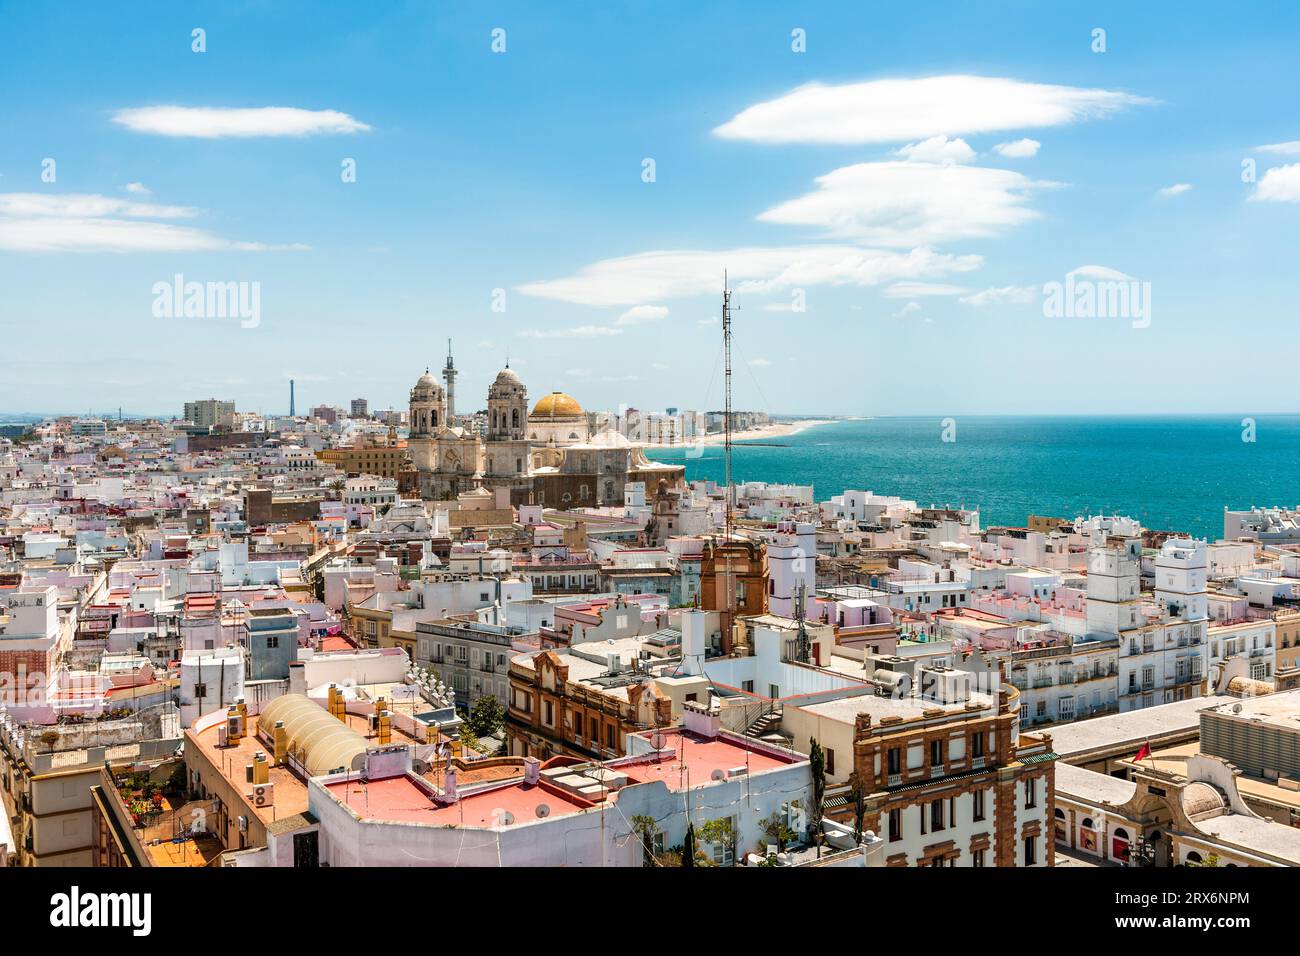 Spain, Andalusia, Cadiz, Residential district of coastal city Stock Photo